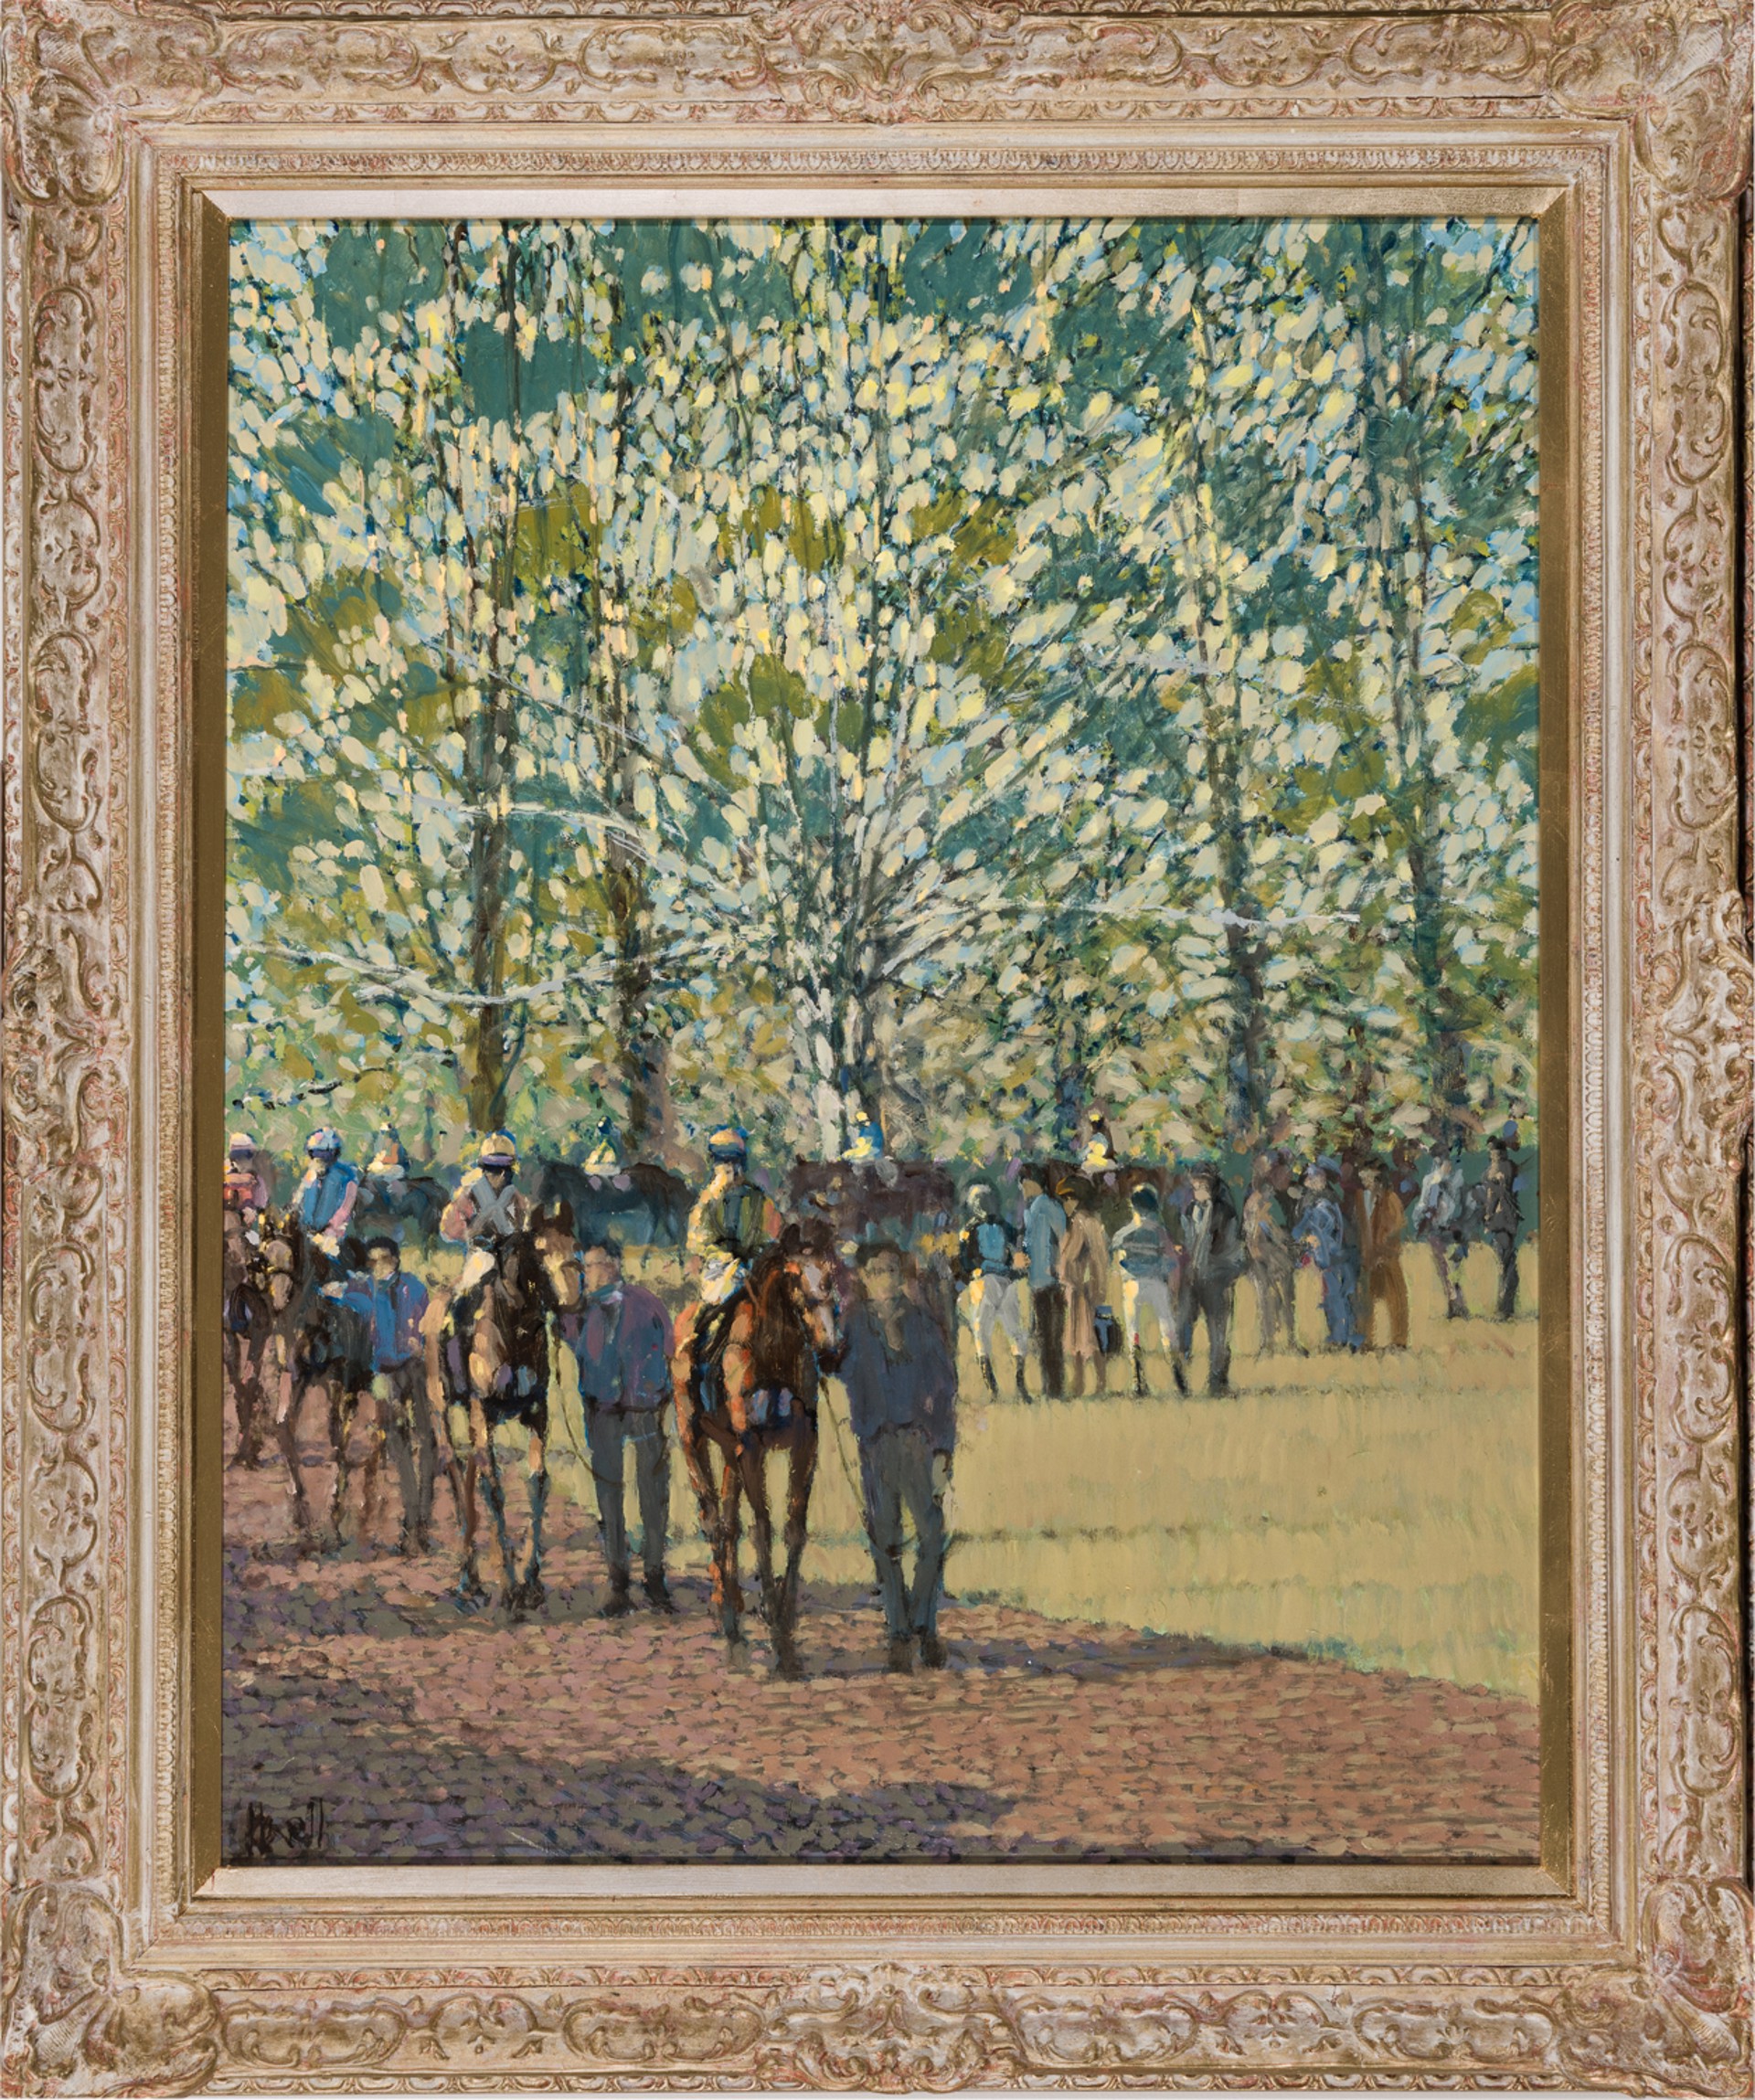 THE PADDOCK, KEENELAND by Peter Howell